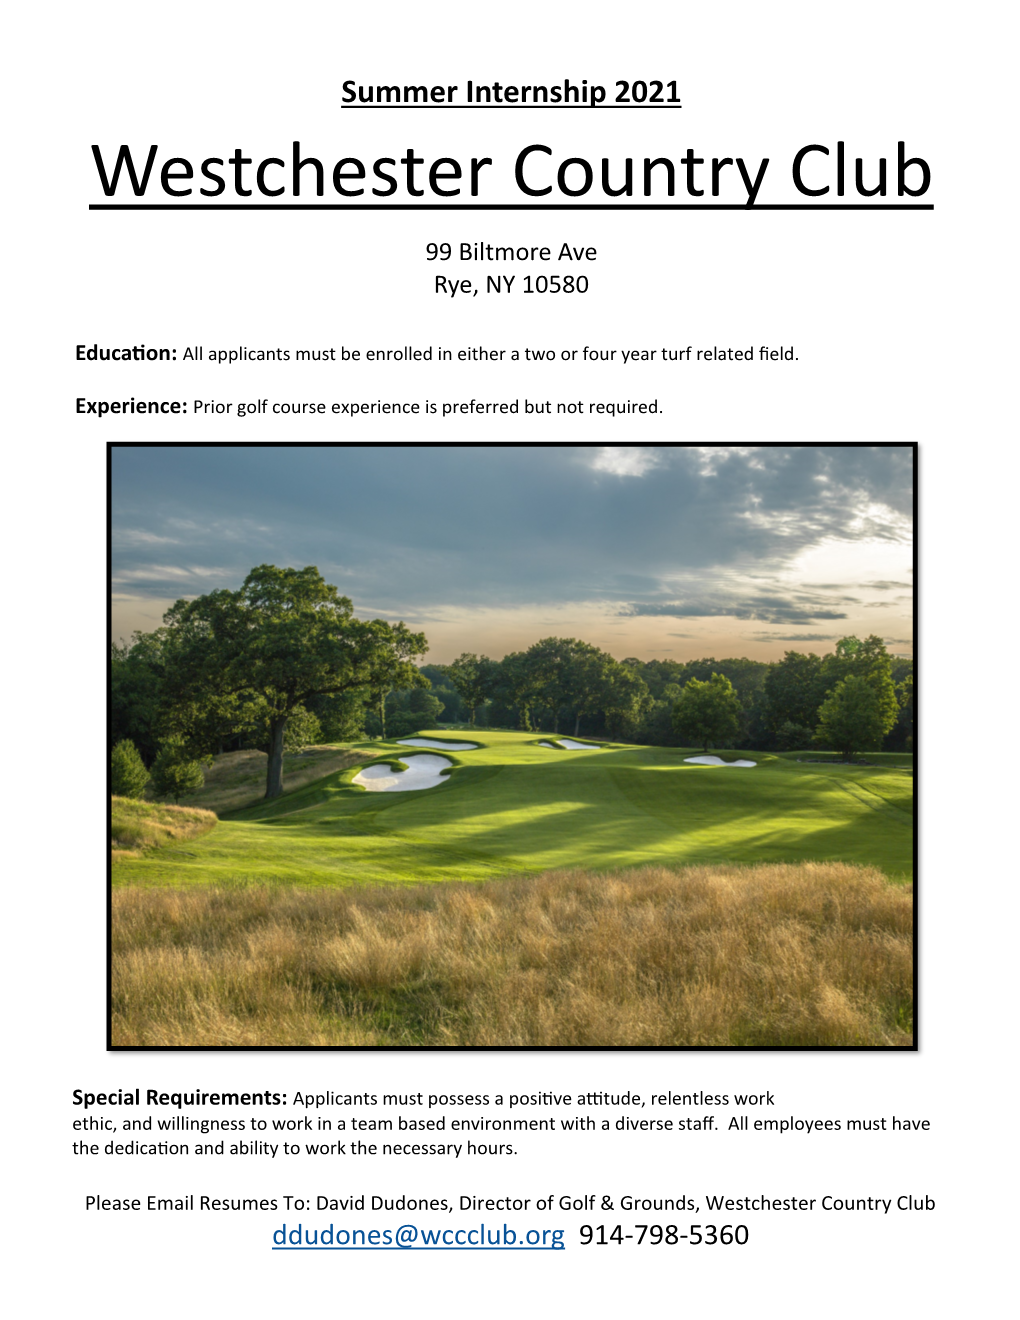 Westchester Country Club 99 Biltmore Ave Rye, NY 10580